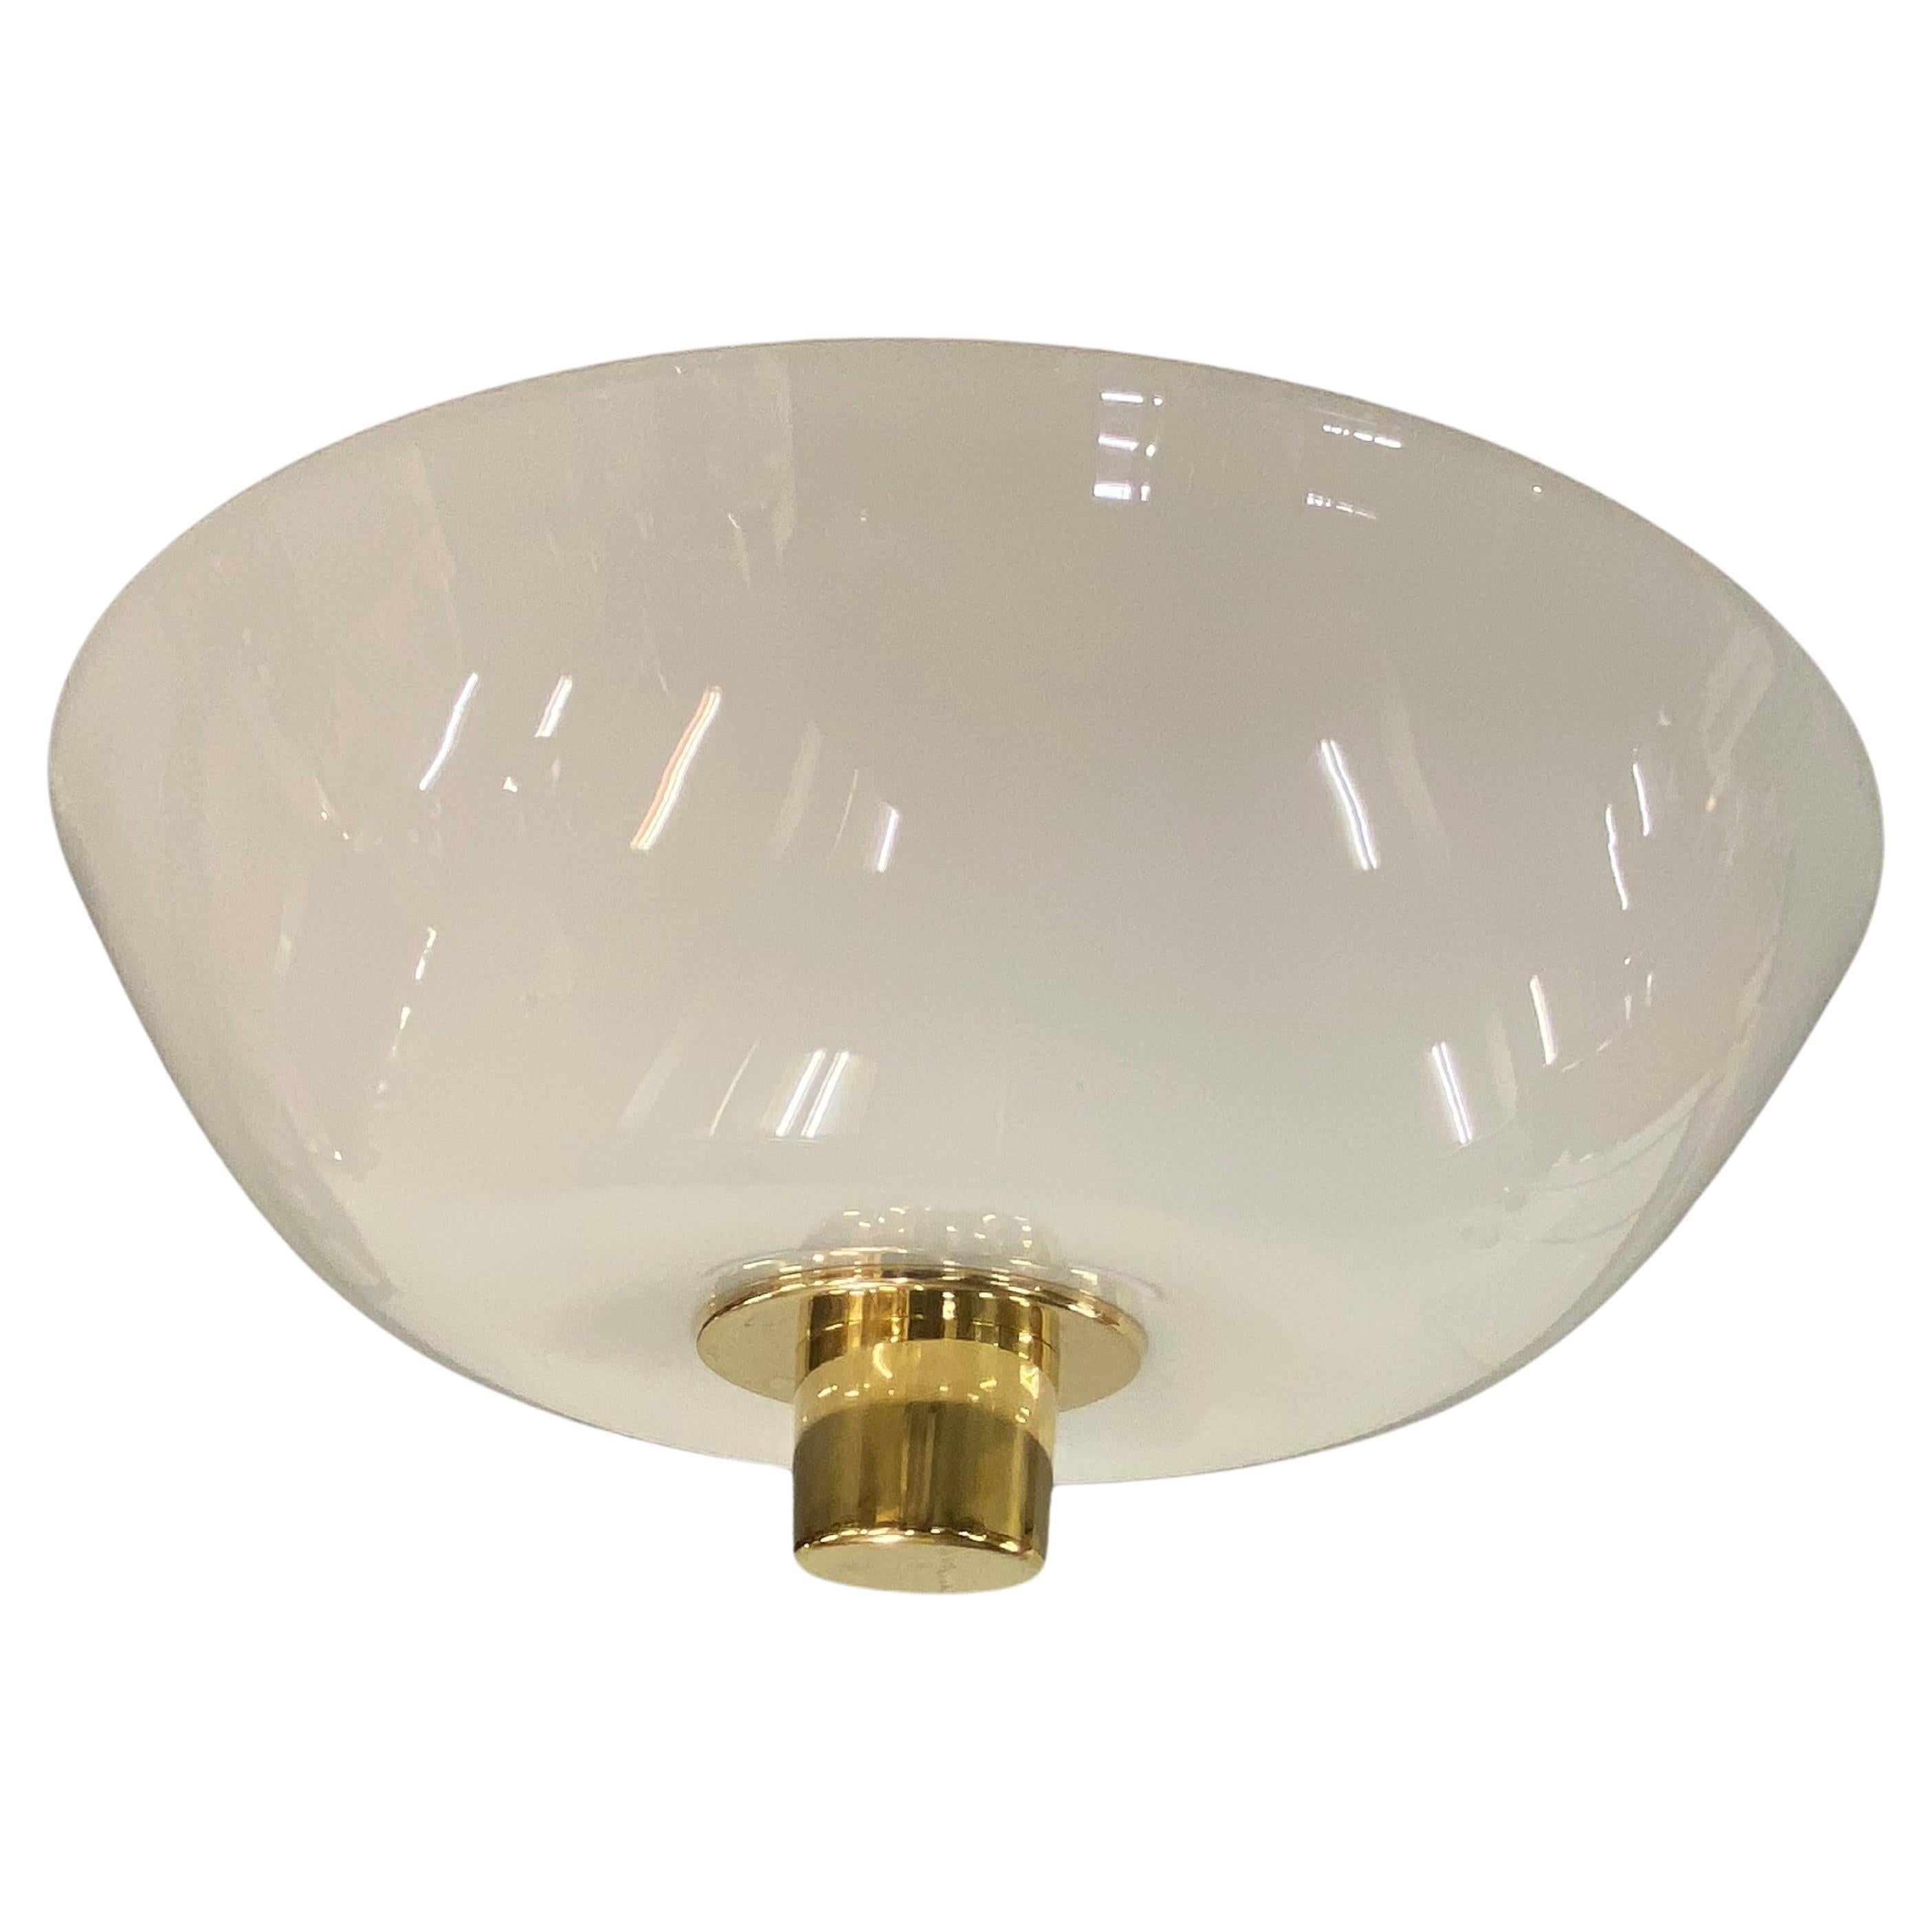 A beautiful ceiling lamp by Paavo Tynell. This model came with different size glass version shades, mainly 40 , 50 or 60 cm long. 
This particular example is in completely original condition. The vanila white colored glass as well. 
This lamp can be